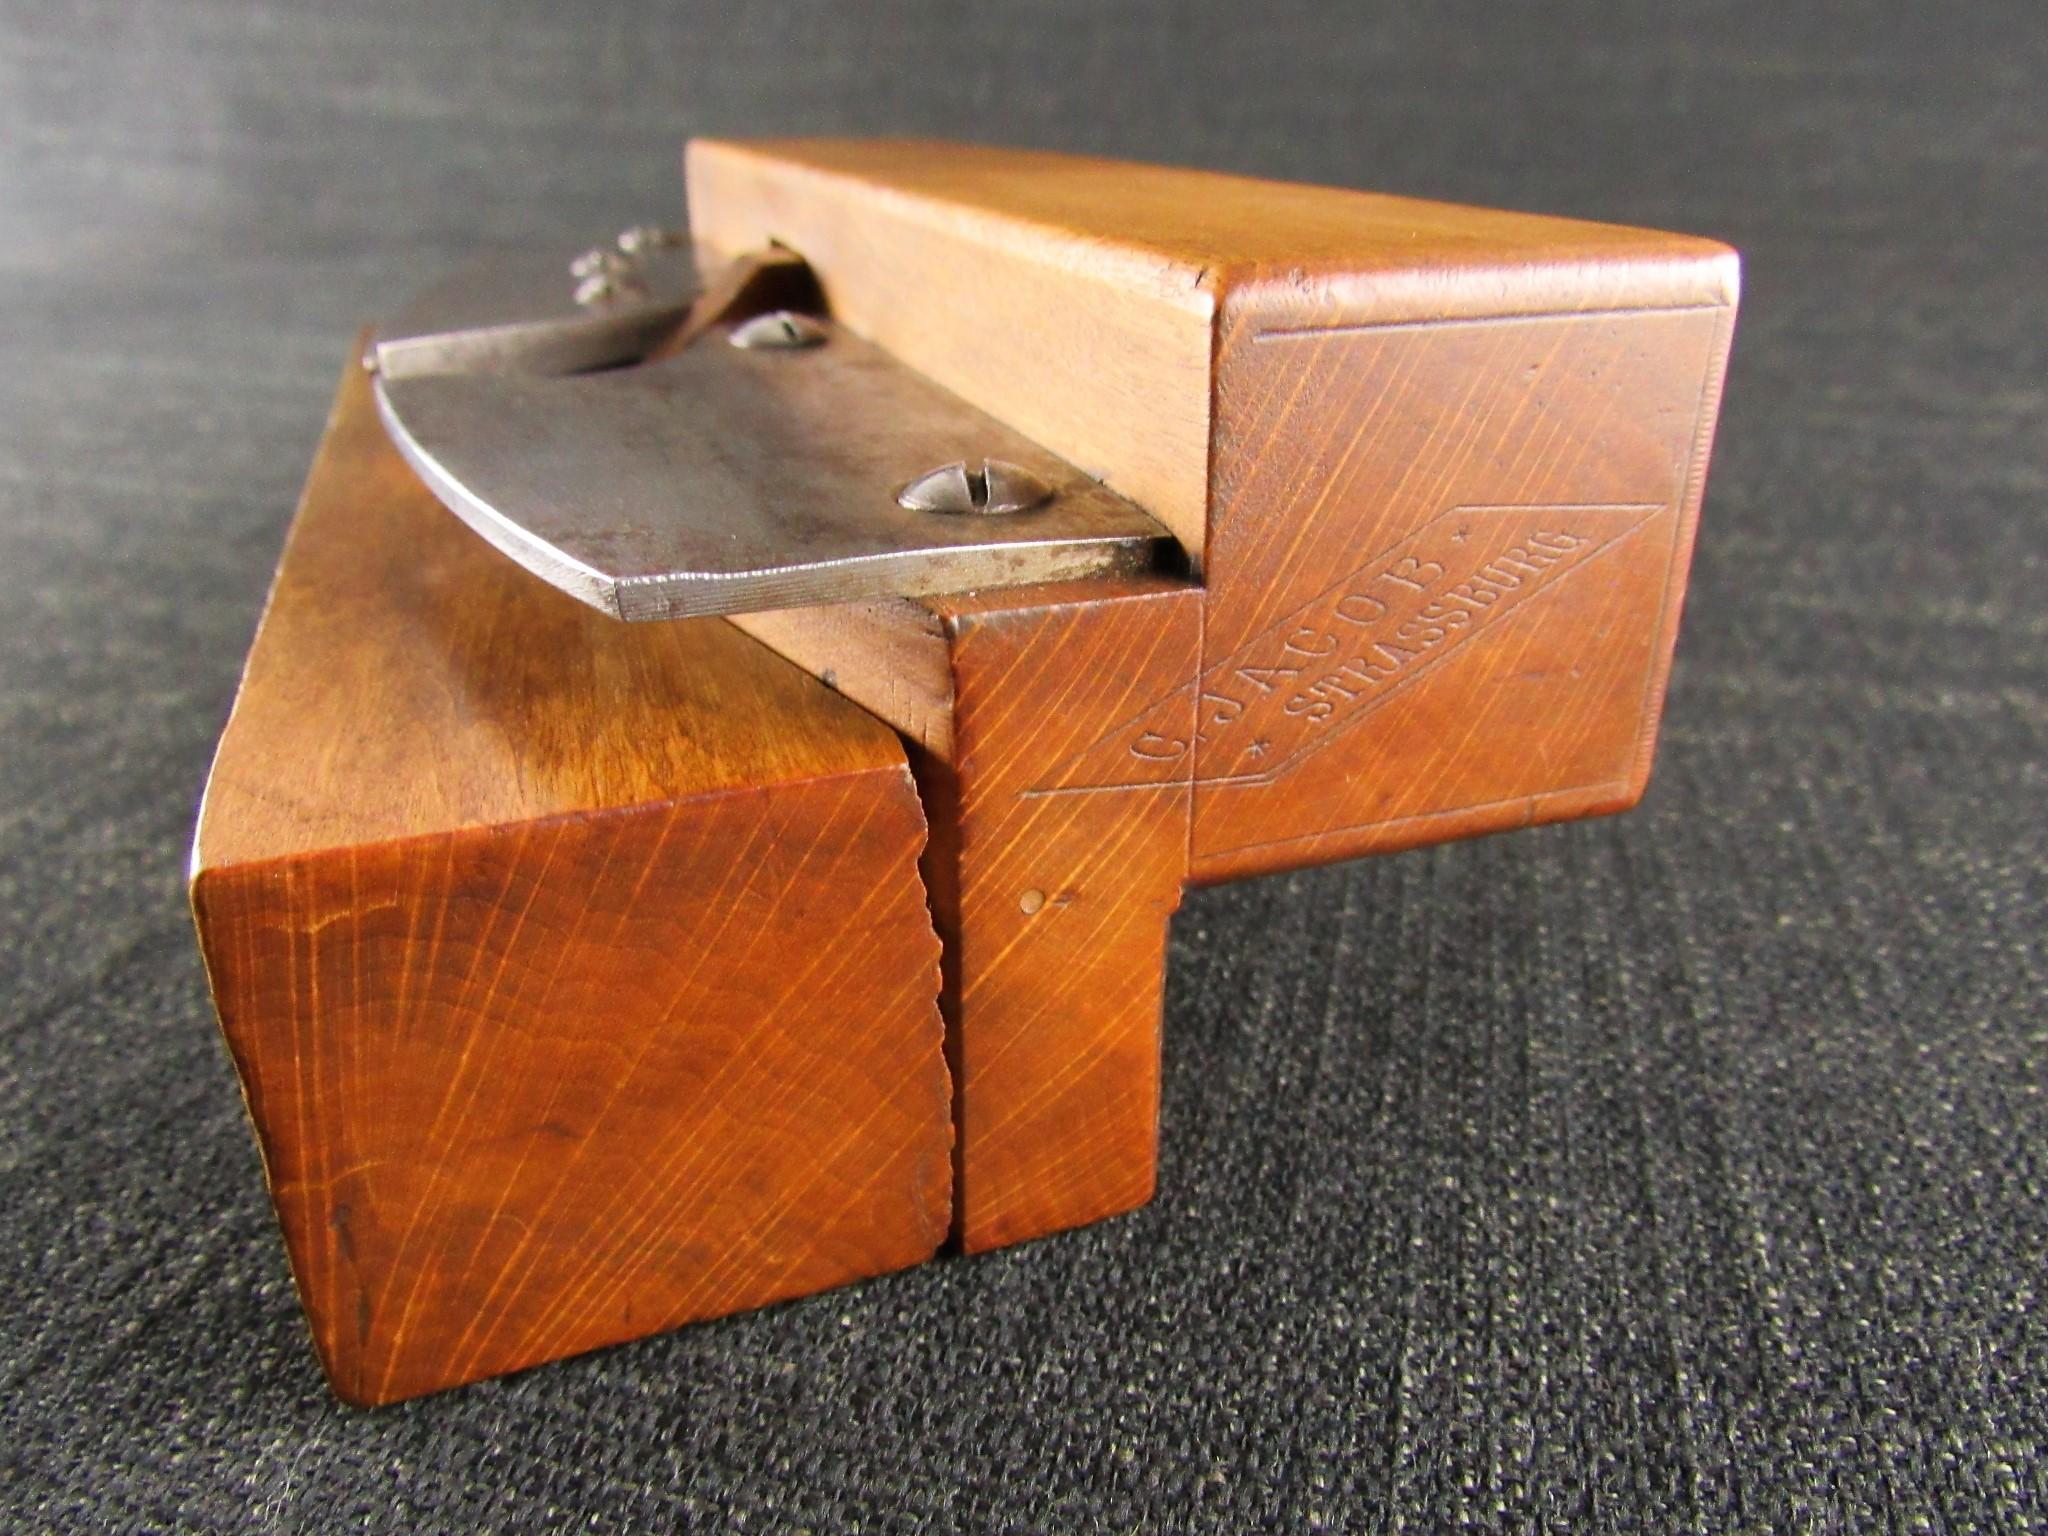 Unusual Wooden Compass Plough Plane by C JACOB of Strassburg